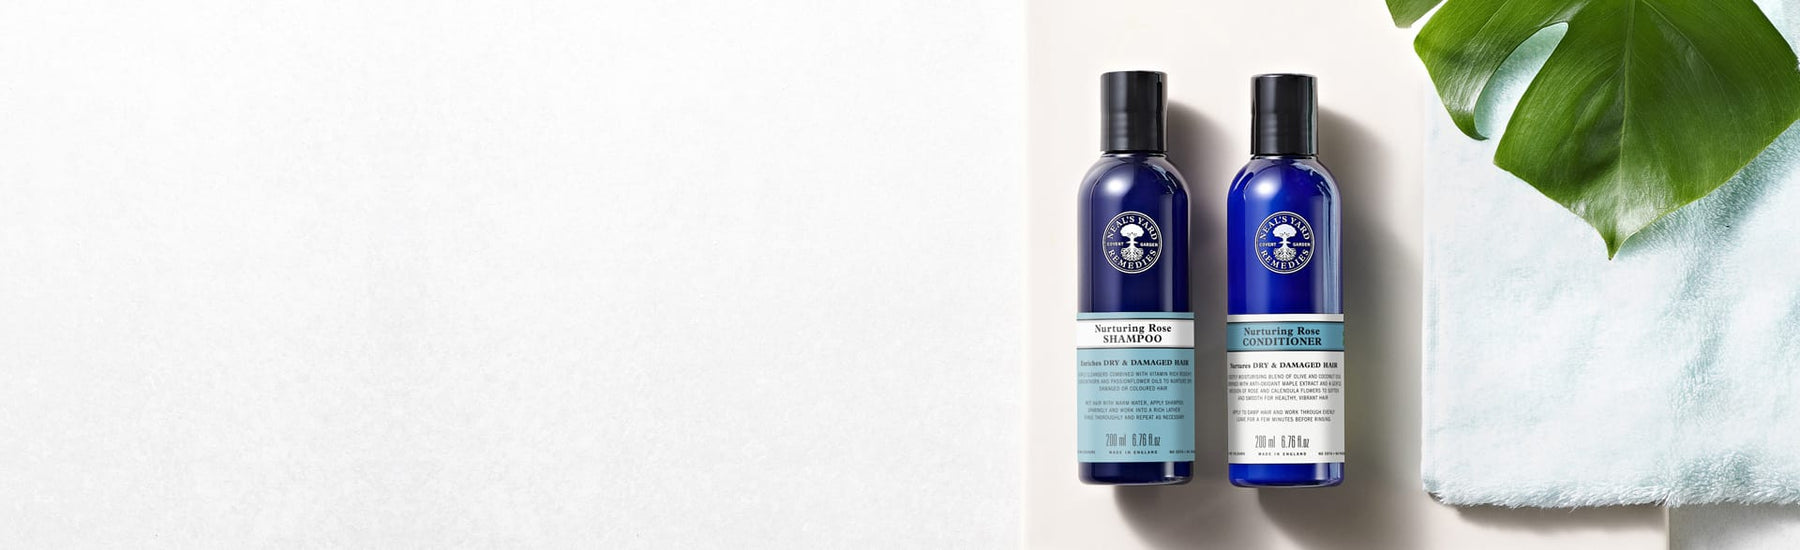 Picture of a bottle of shampoo and a hair conditioner by Neal's Yard Remedies